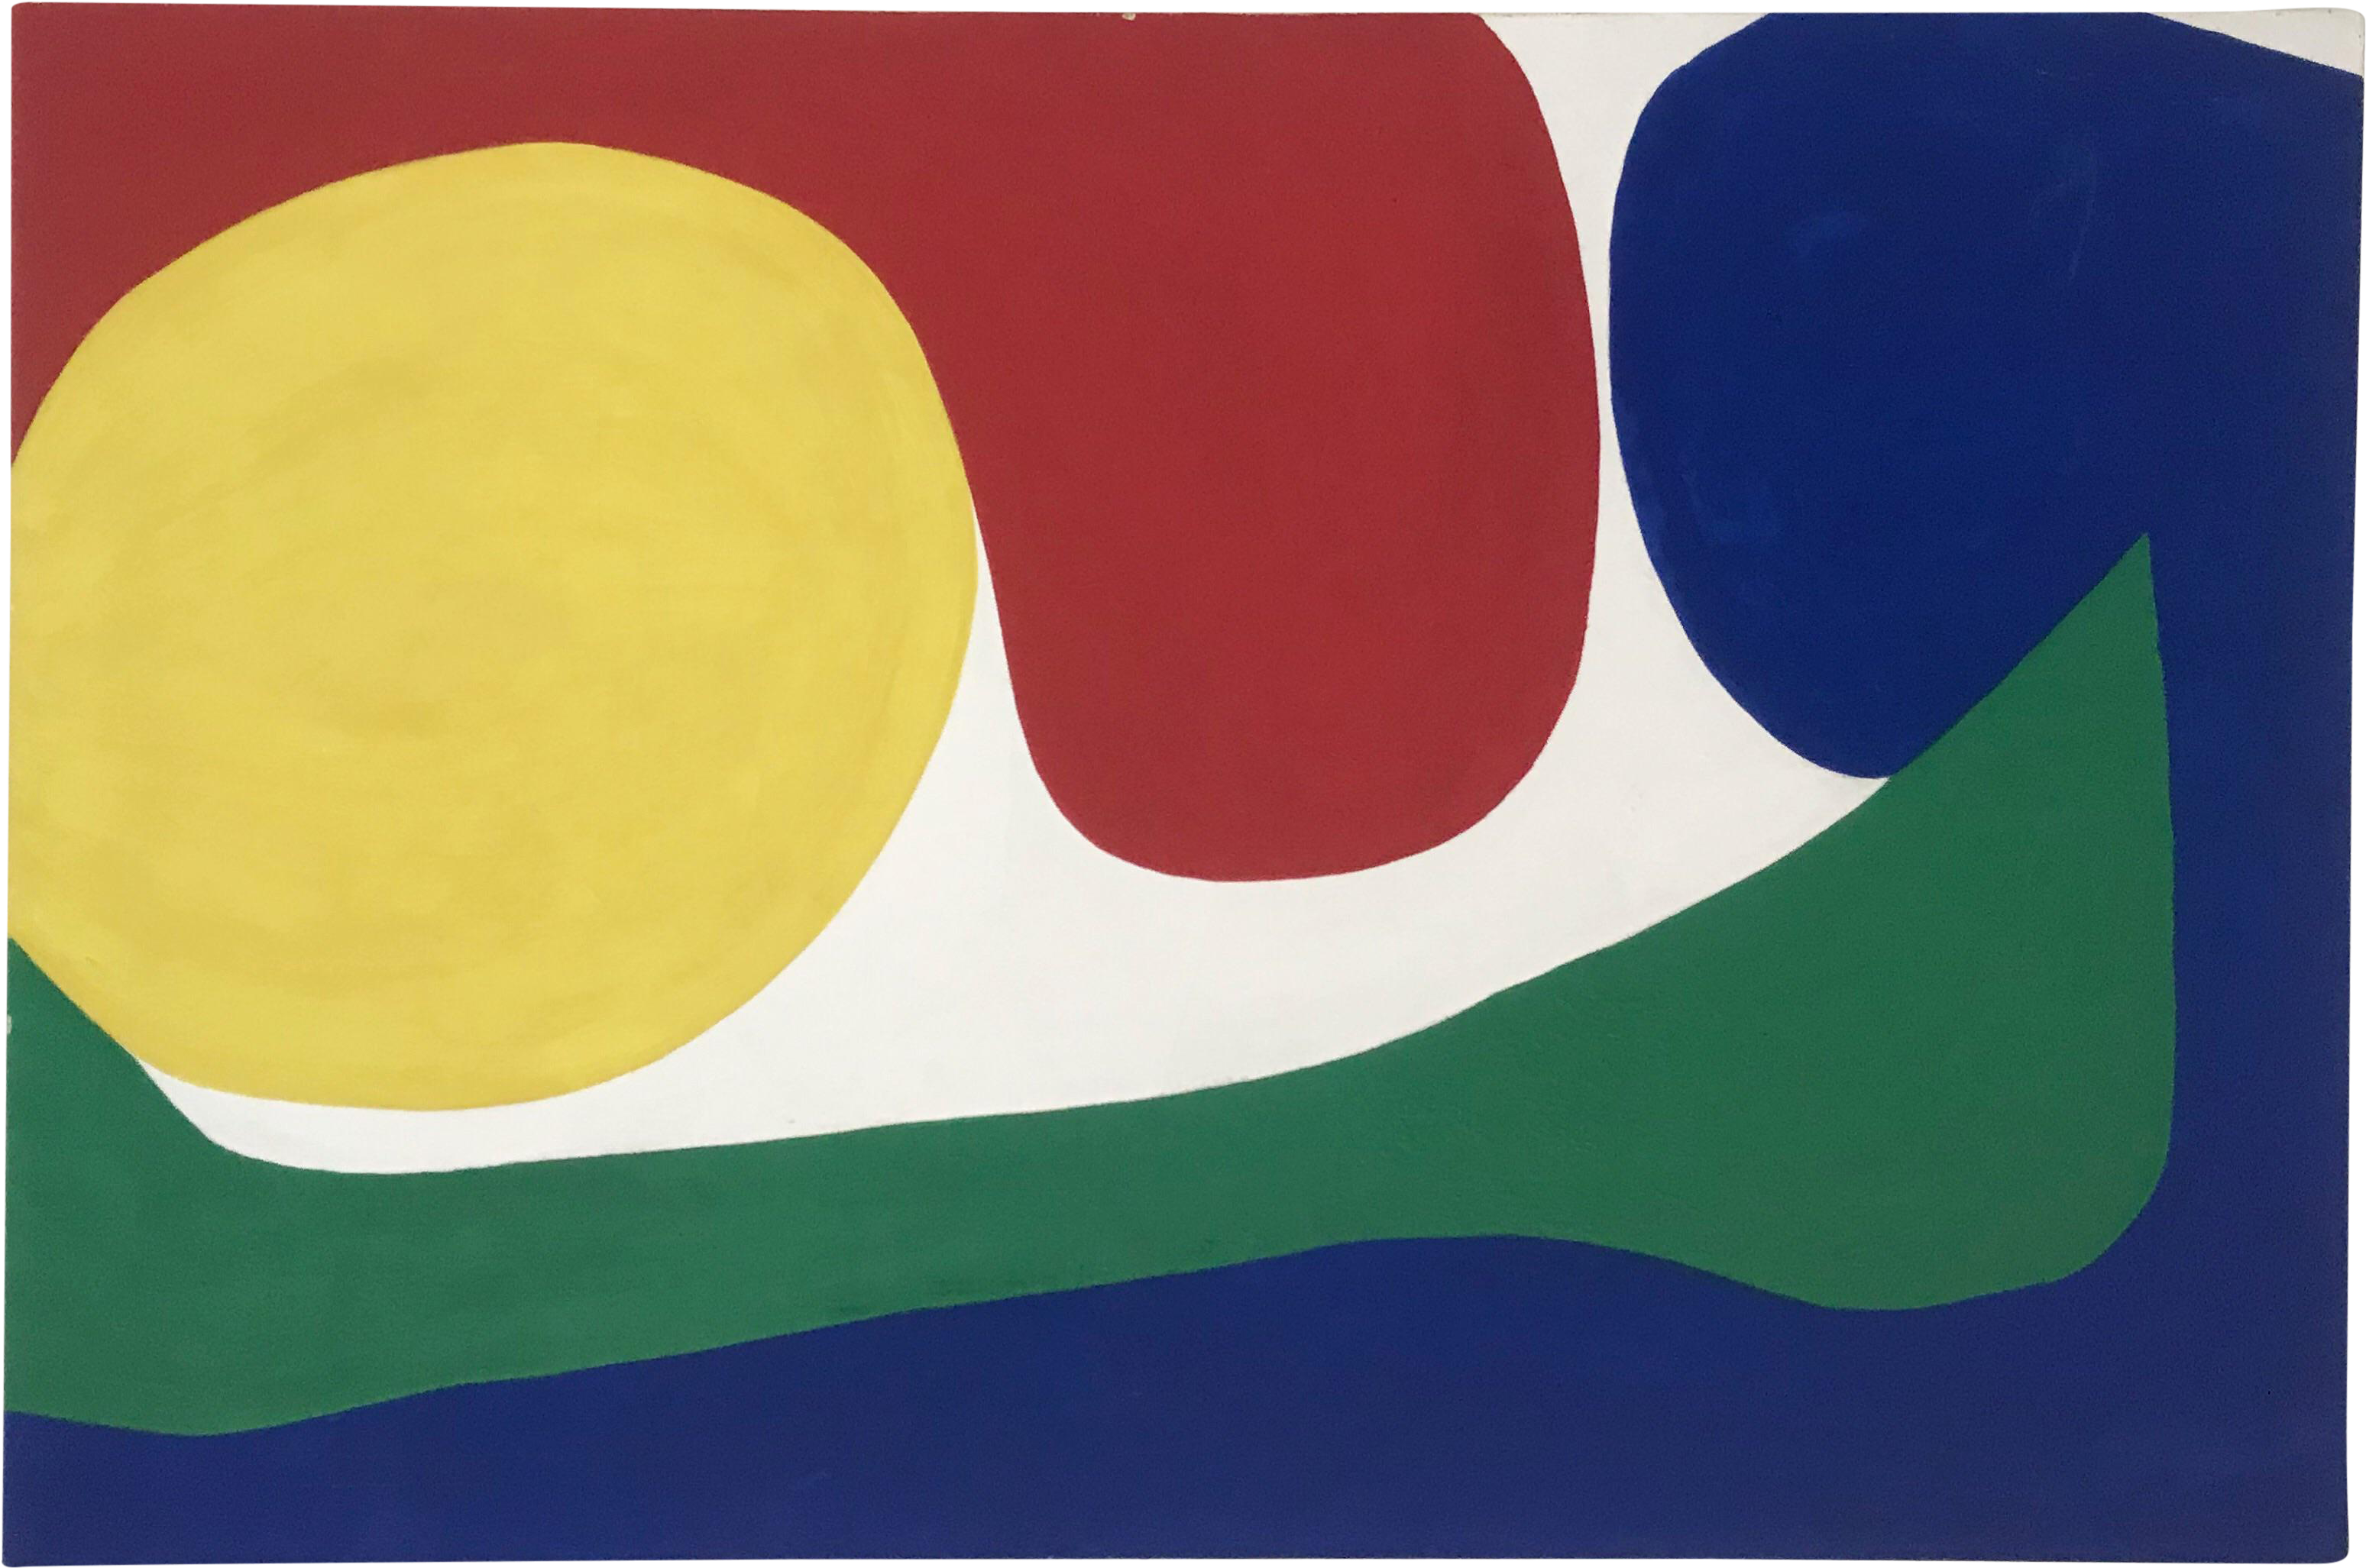 Hard Edge Abstract Painting On Canvas, 1960s - Flag (3440x2280)